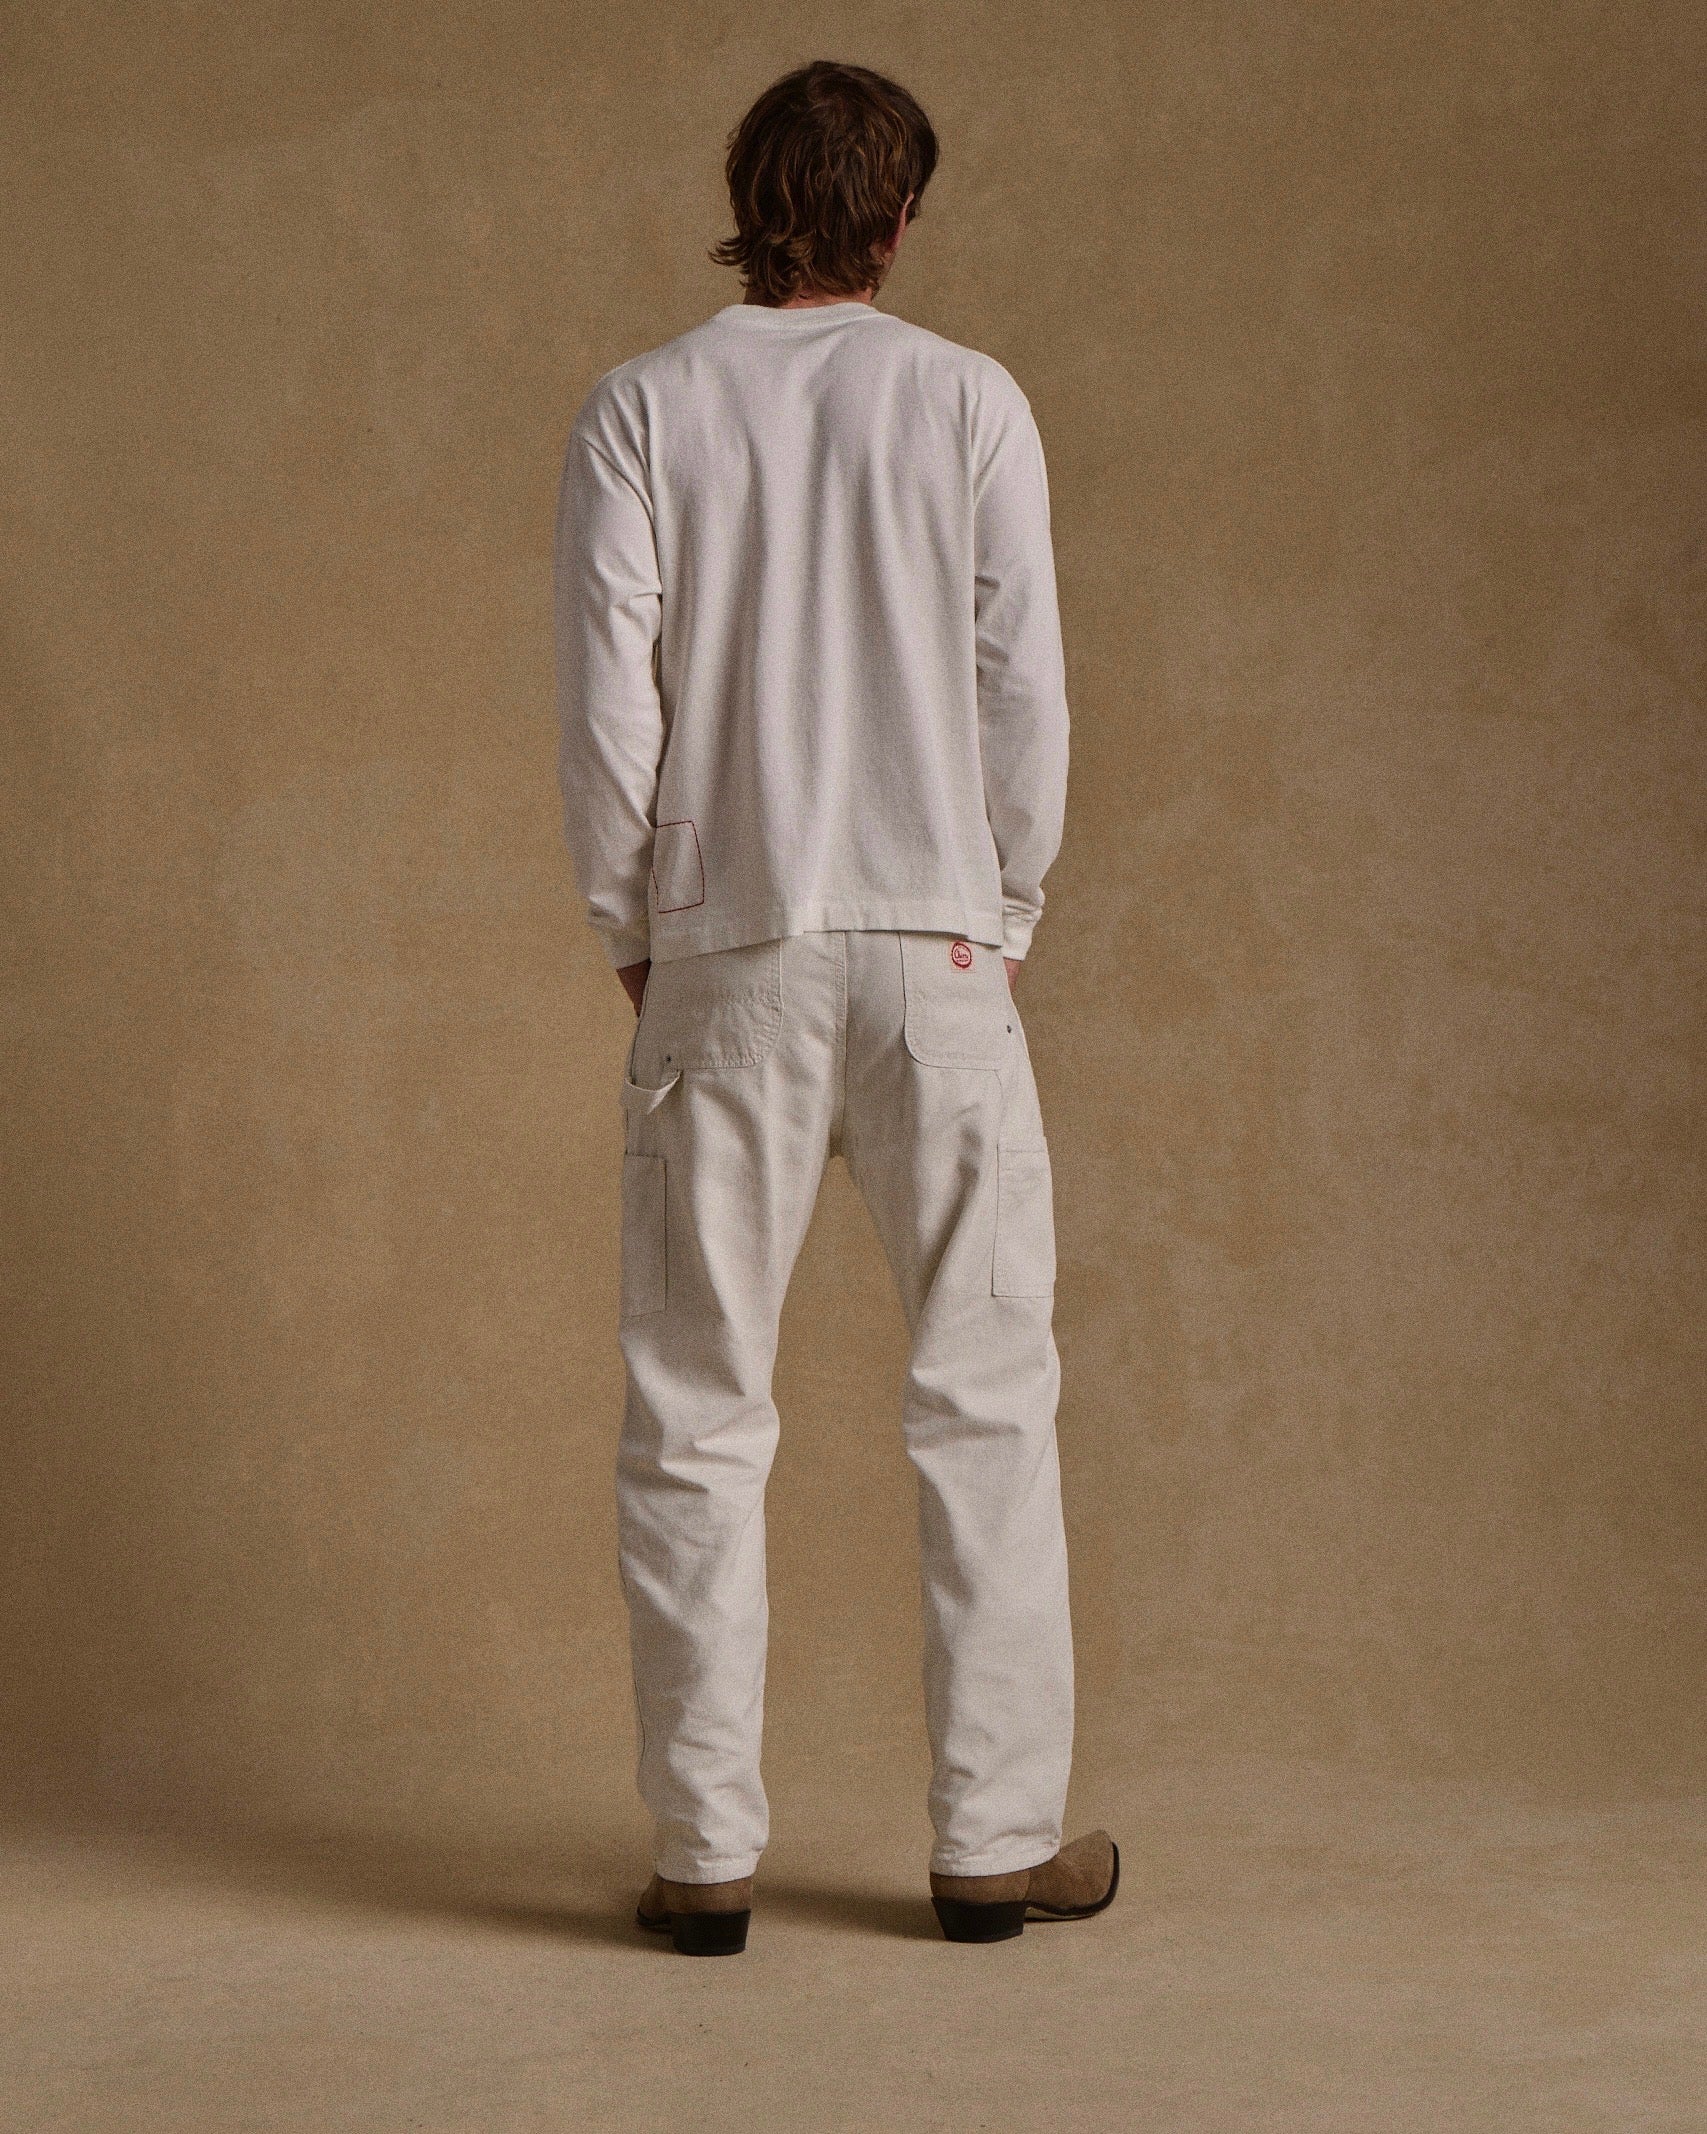 Classic Canvas Double Knee (White)